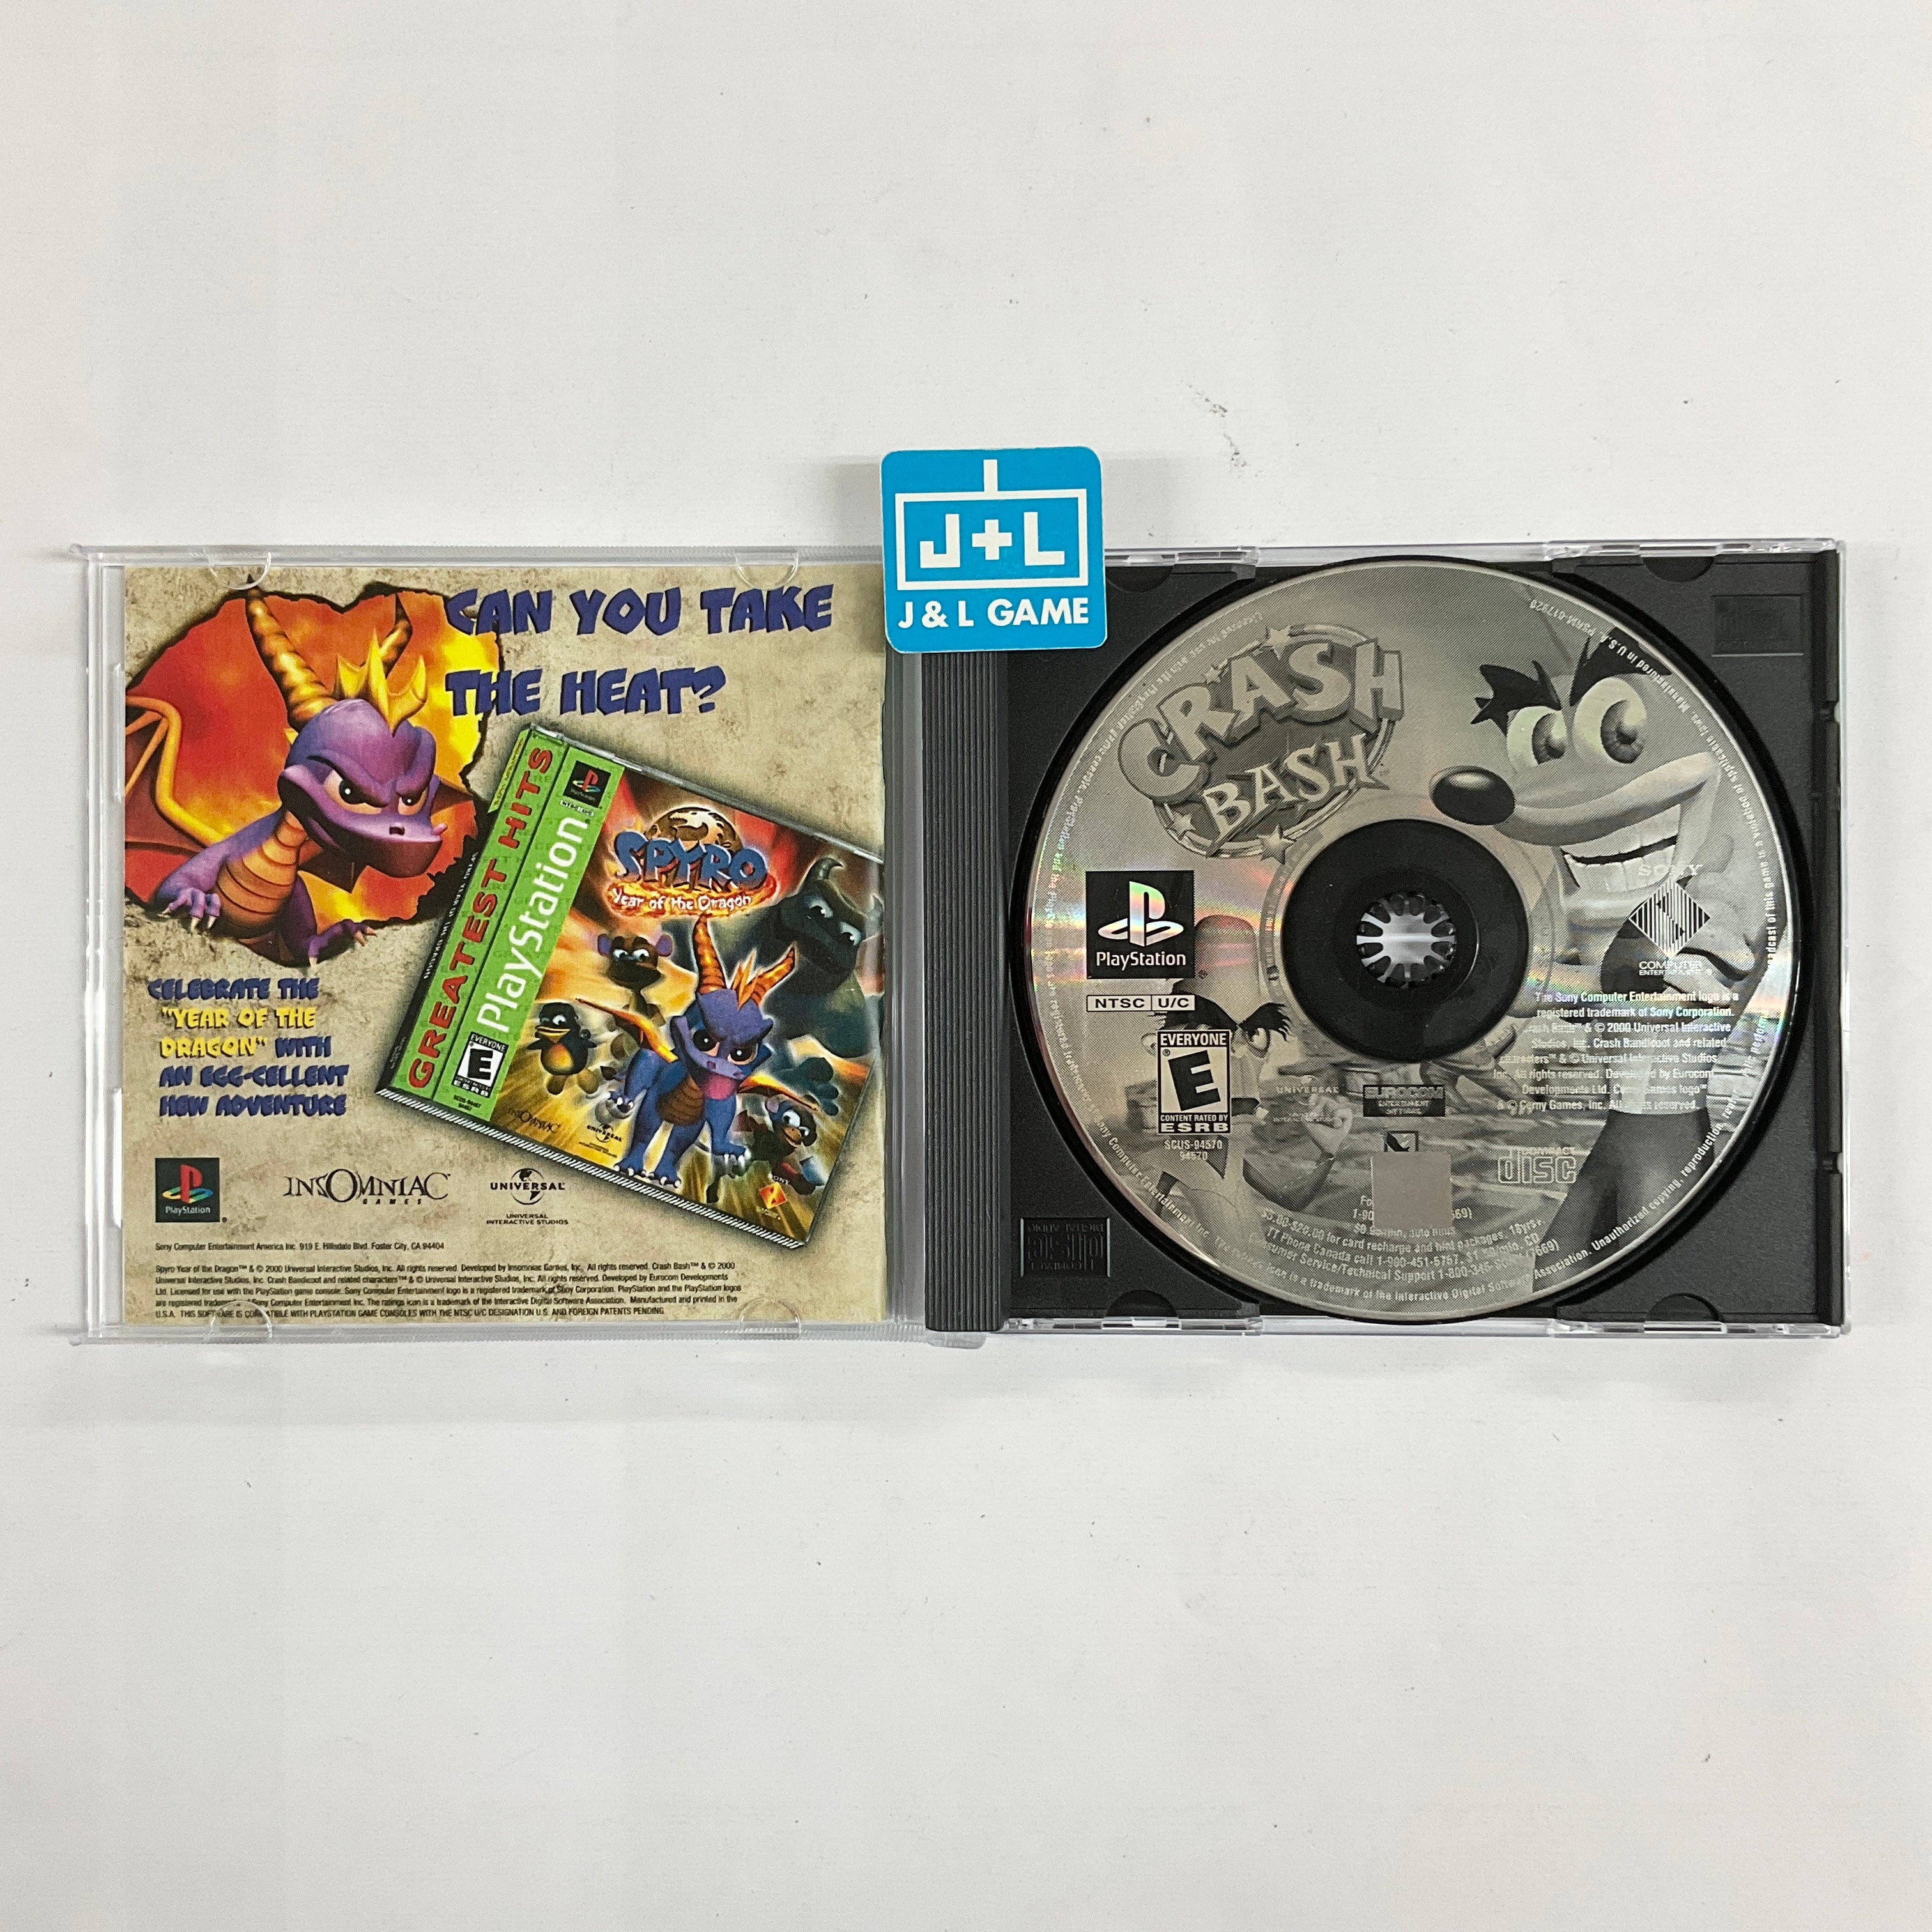 Crash Bash (Greatest Hits) - (PS1) PlayStation 1 [Pre-Owned] Video Games SCEA   